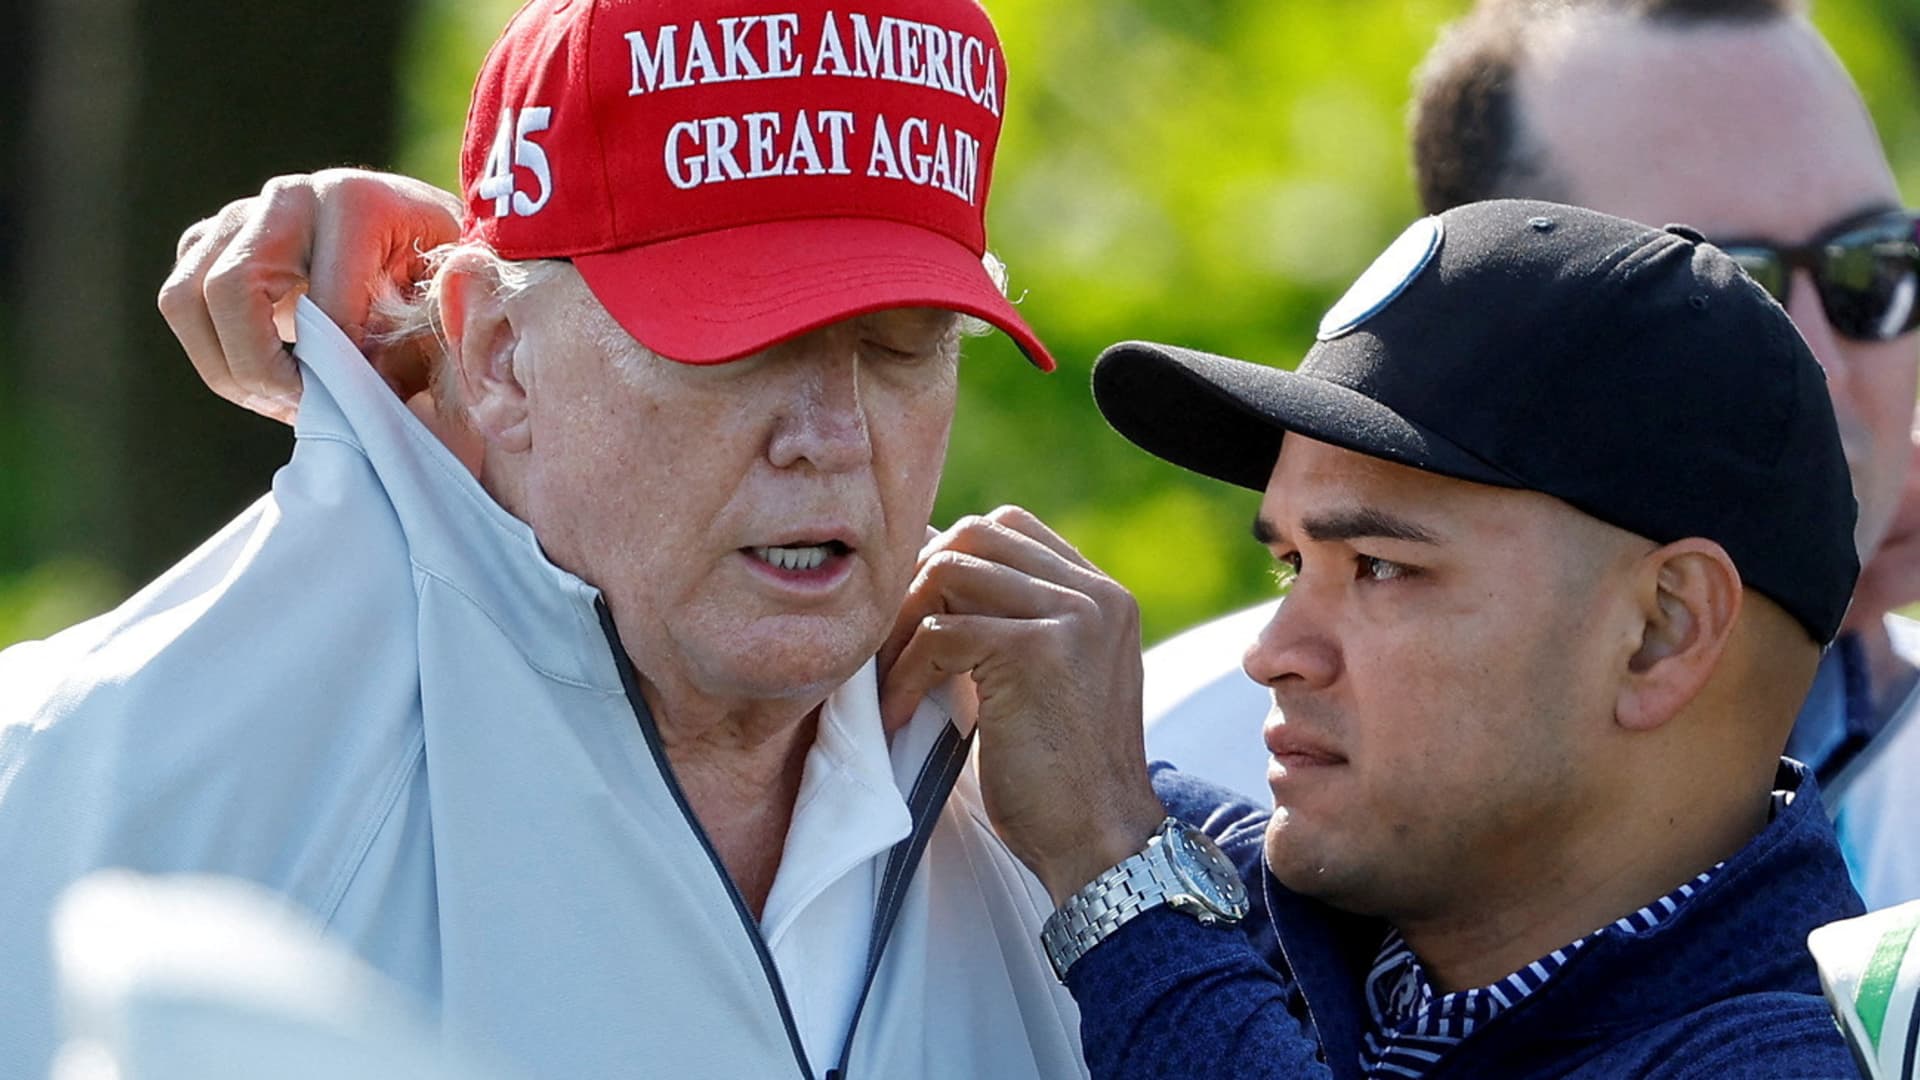 Walt Nauta, personal aide to former U.S. President Donald Trump who faces charges of being Trump's co-conspirator in the alleged mishandling of classified documents, fixes Trump's collar before a LIV Golf Pro-Am golf tournament at the Trump National Golf Club in Sterling, Virginia, U.S. May 25, 2023. 